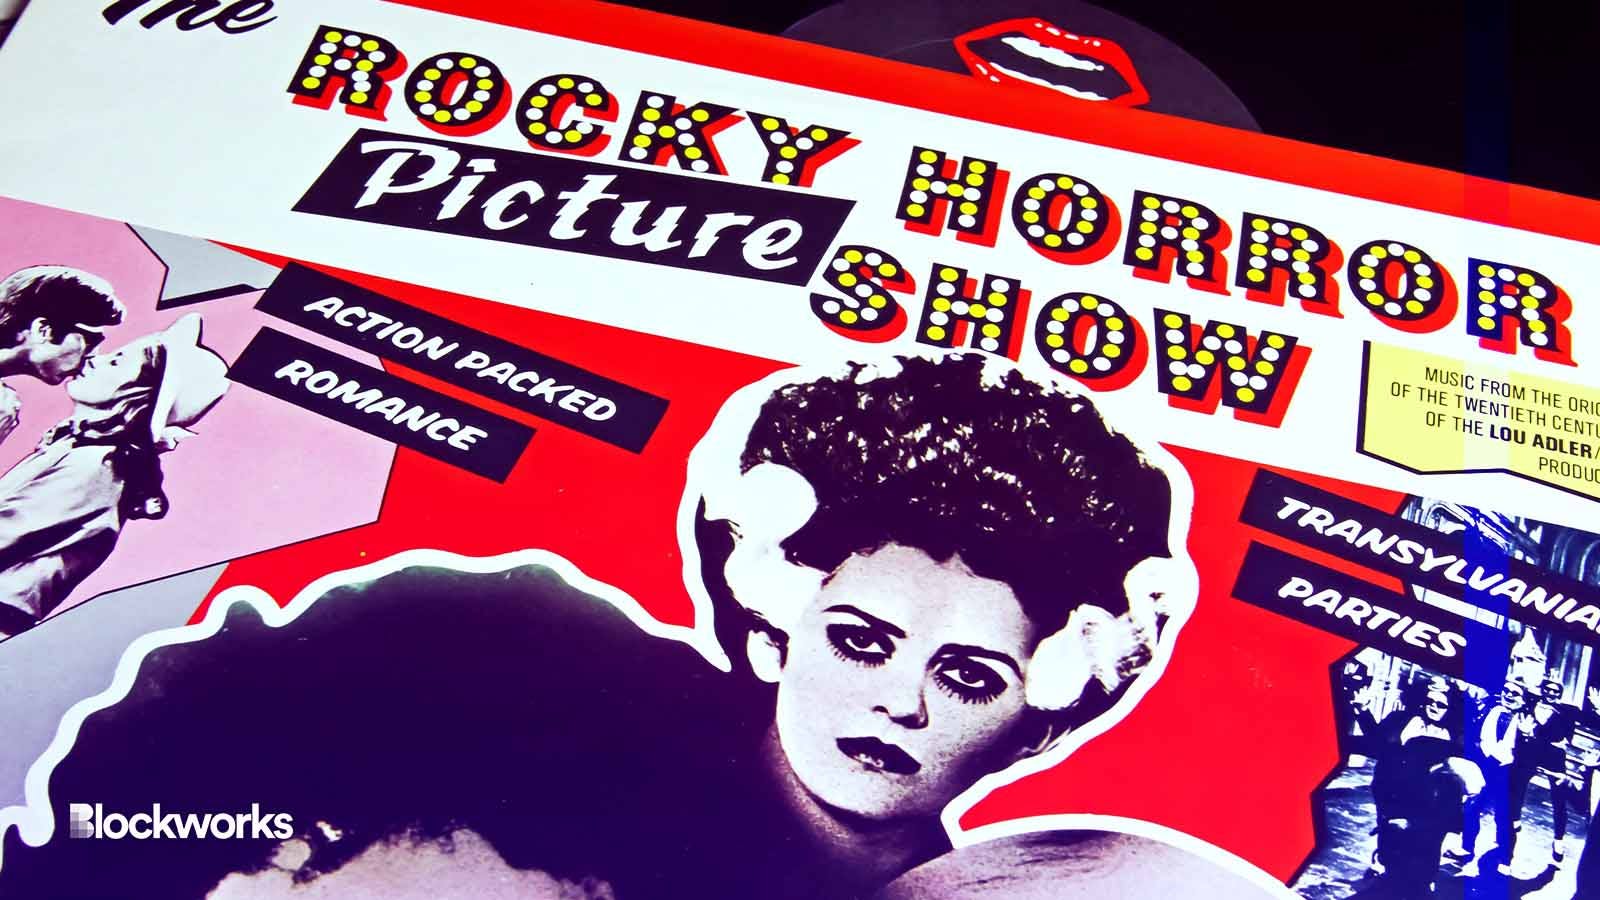 Rocky Horror Show NFT compilation to be released in June, metaverse in the works